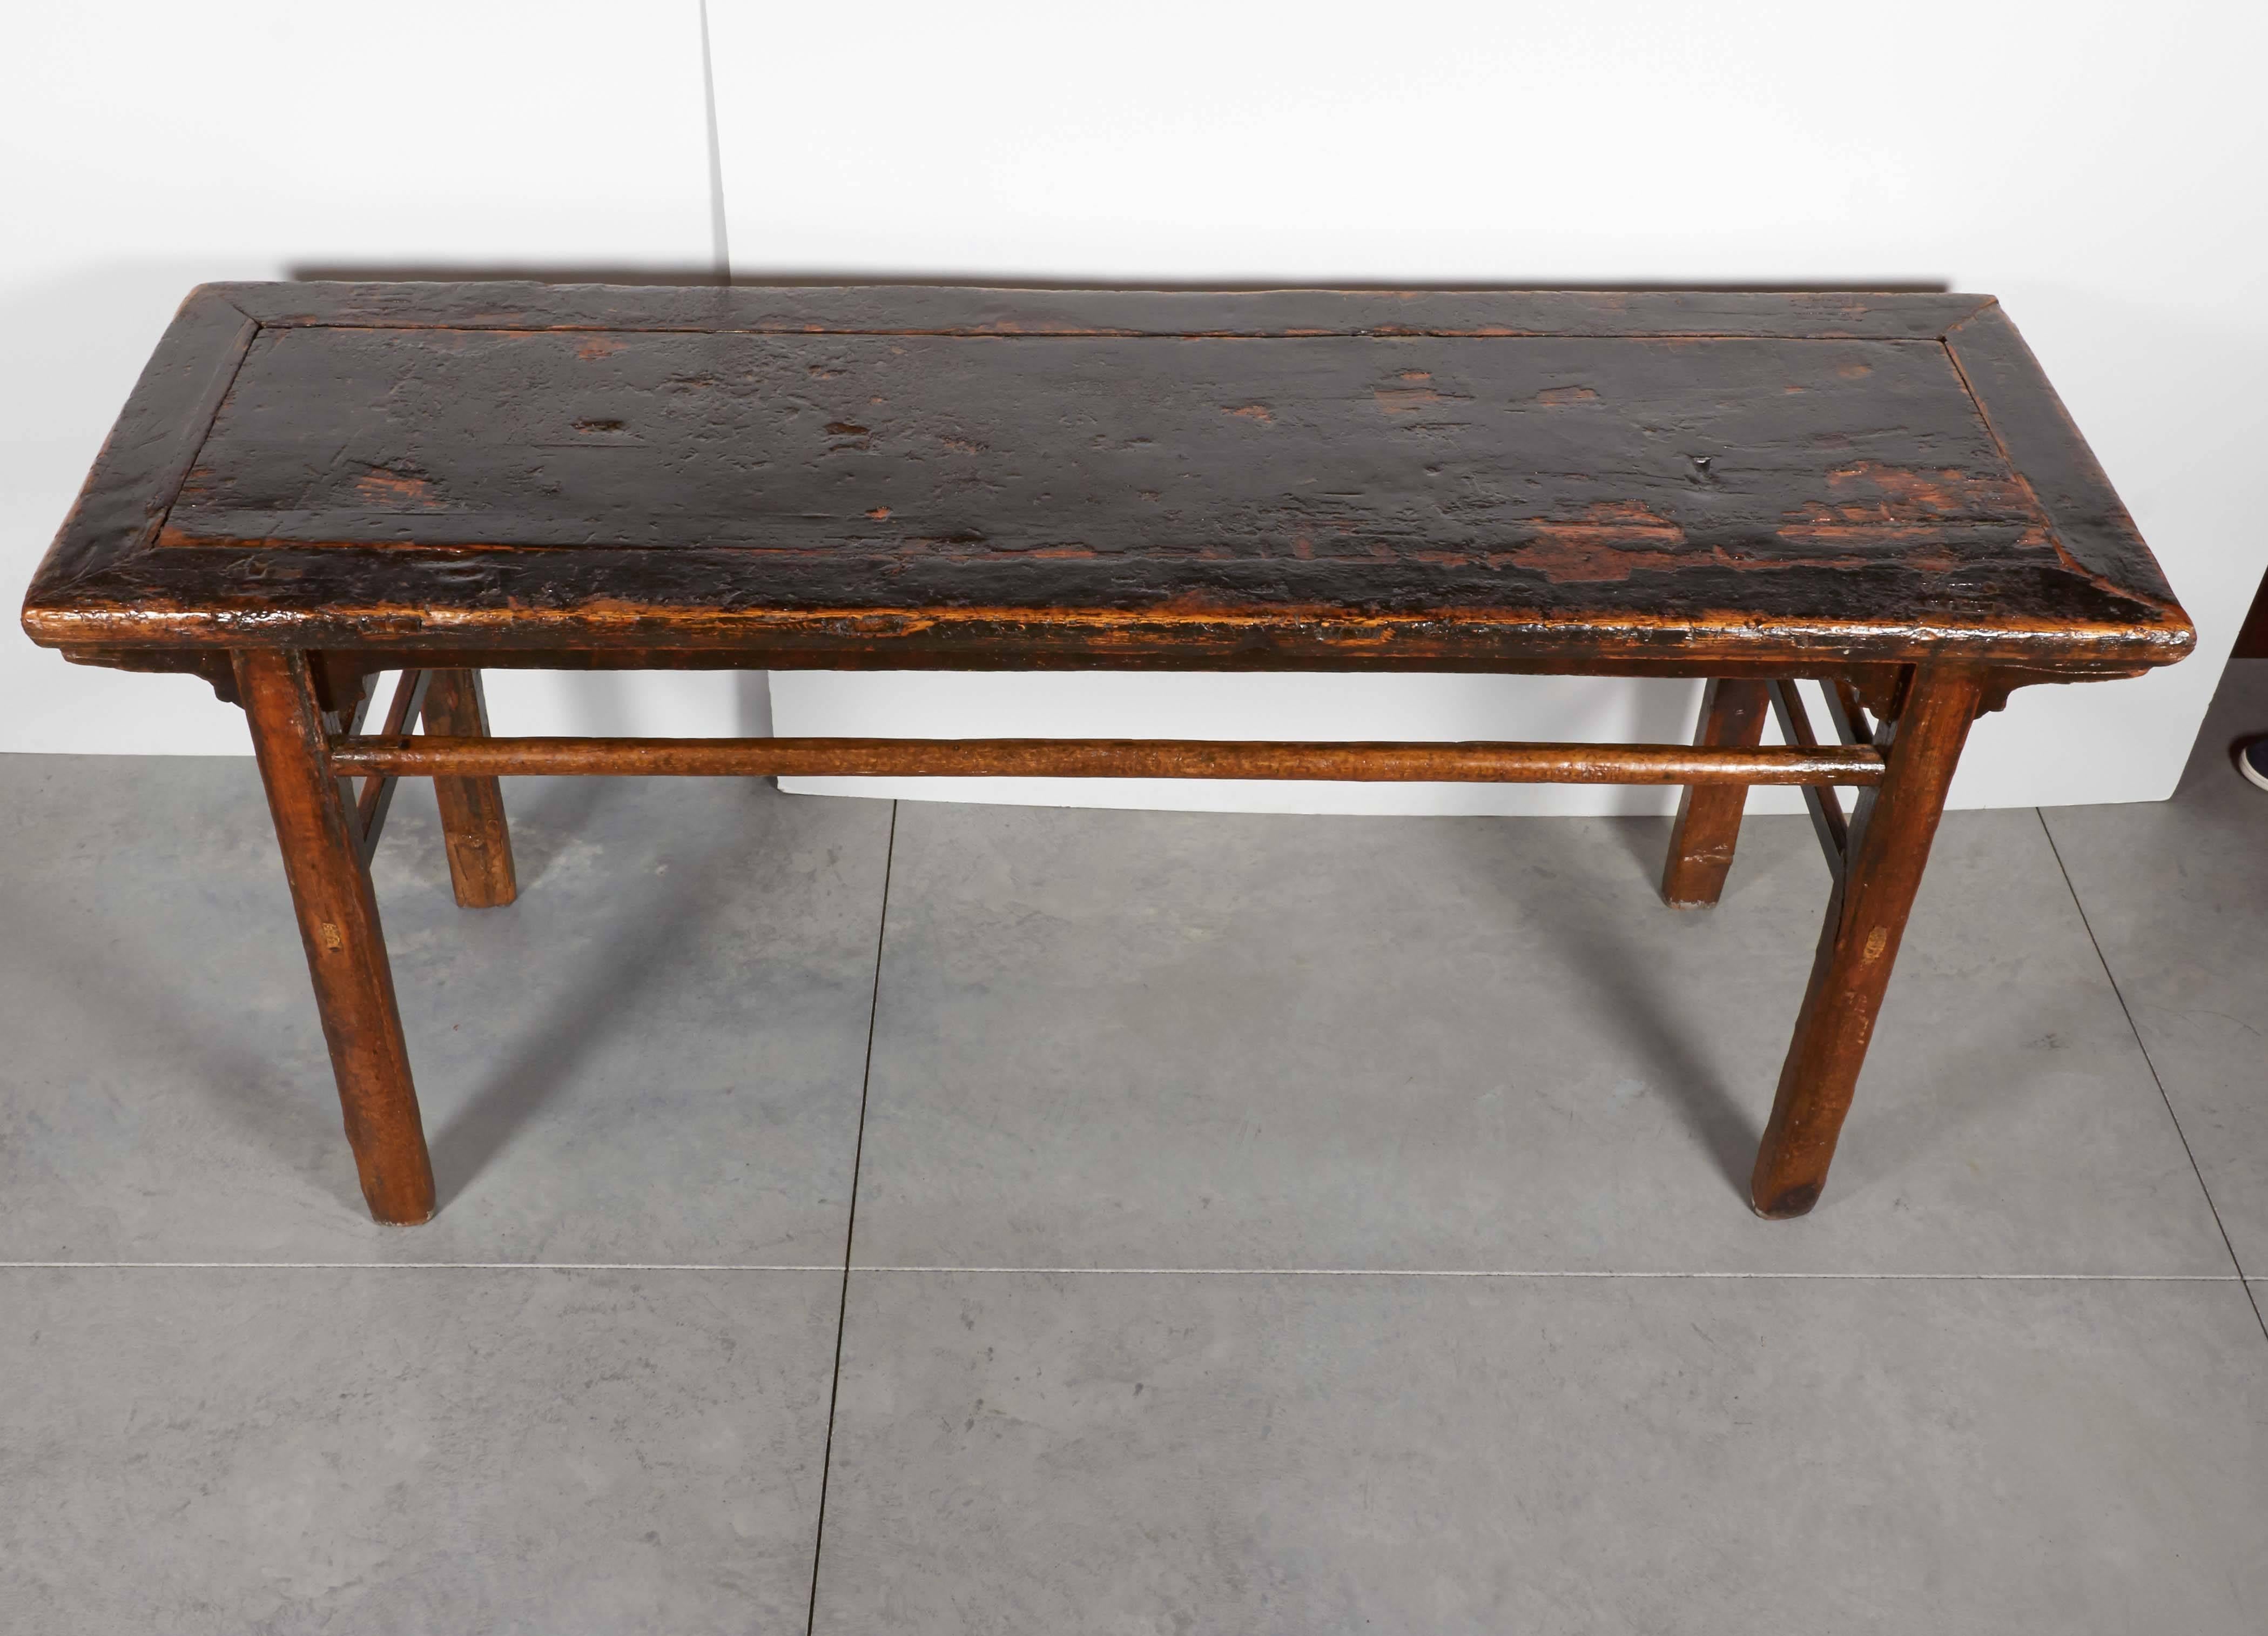 A perfectly distressed and heavily lacquered antique Chinese painting table with an incredible patina and simple, clean design. Excellent country piece that shows it's age beautifully. From Gansu Province, circa 1880.

T592.